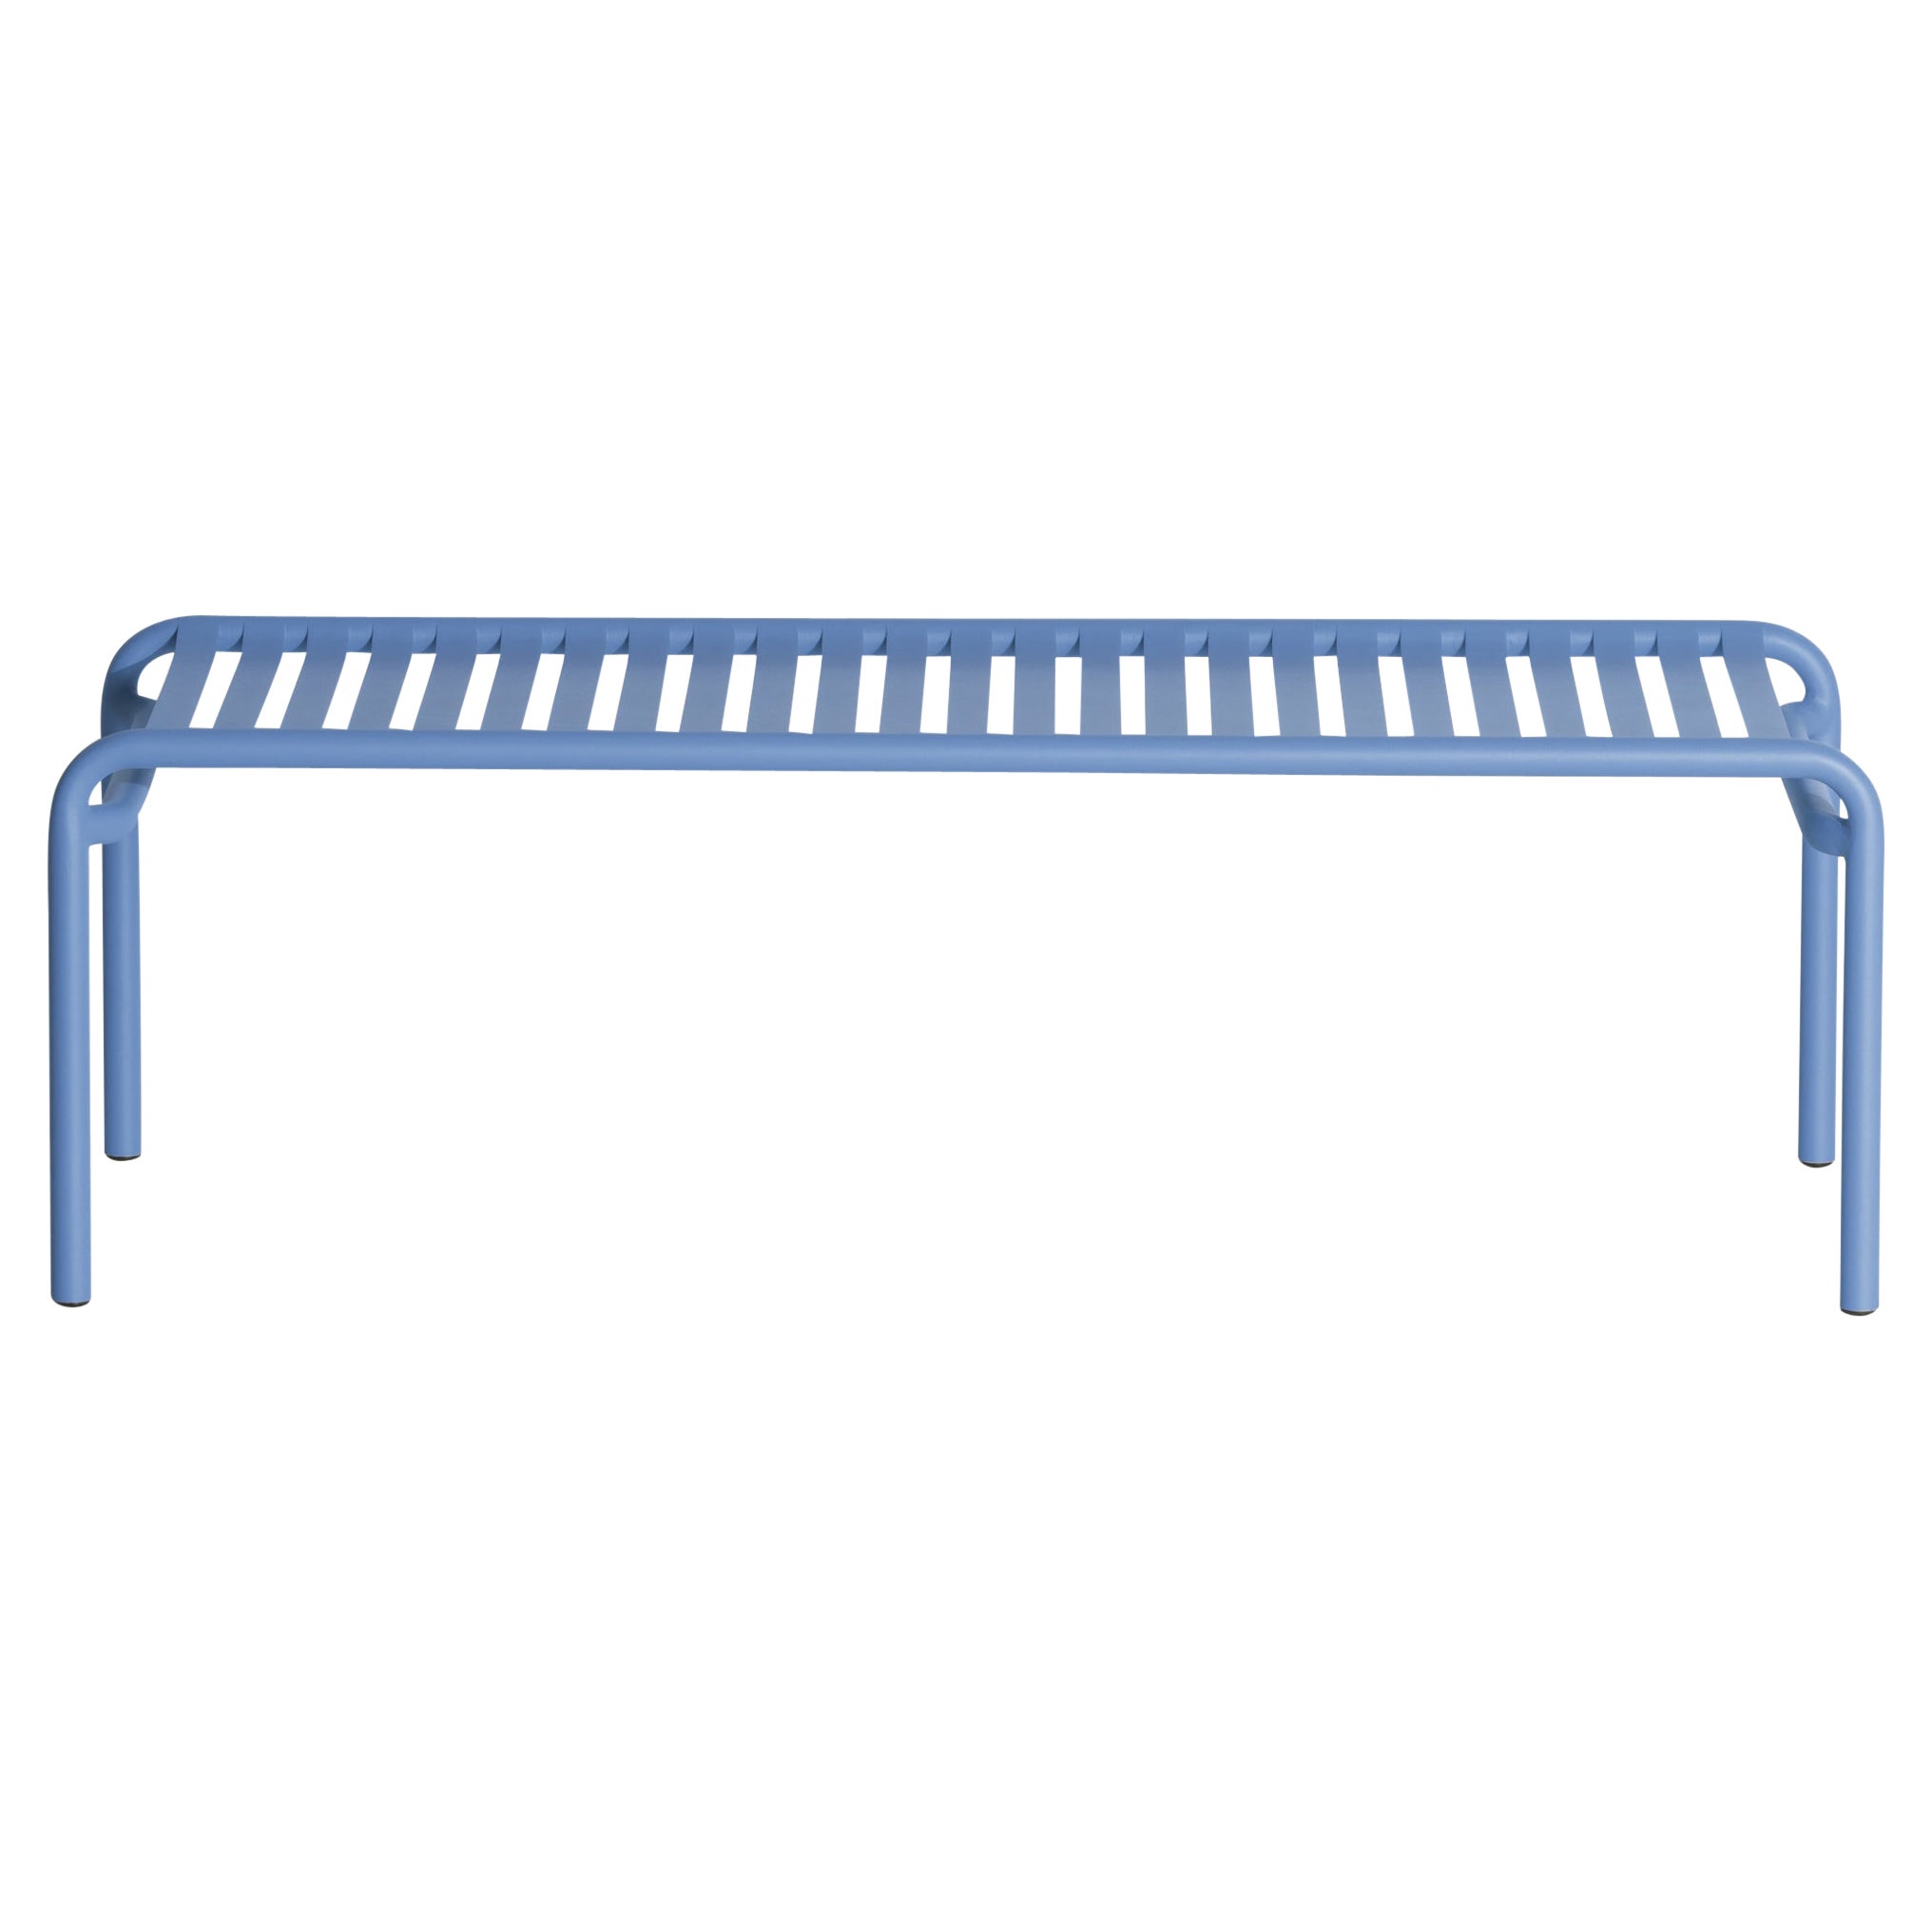 Petite Friture Week-End Long Coffee Table in Azur Blue Aluminium, 2017 For Sale